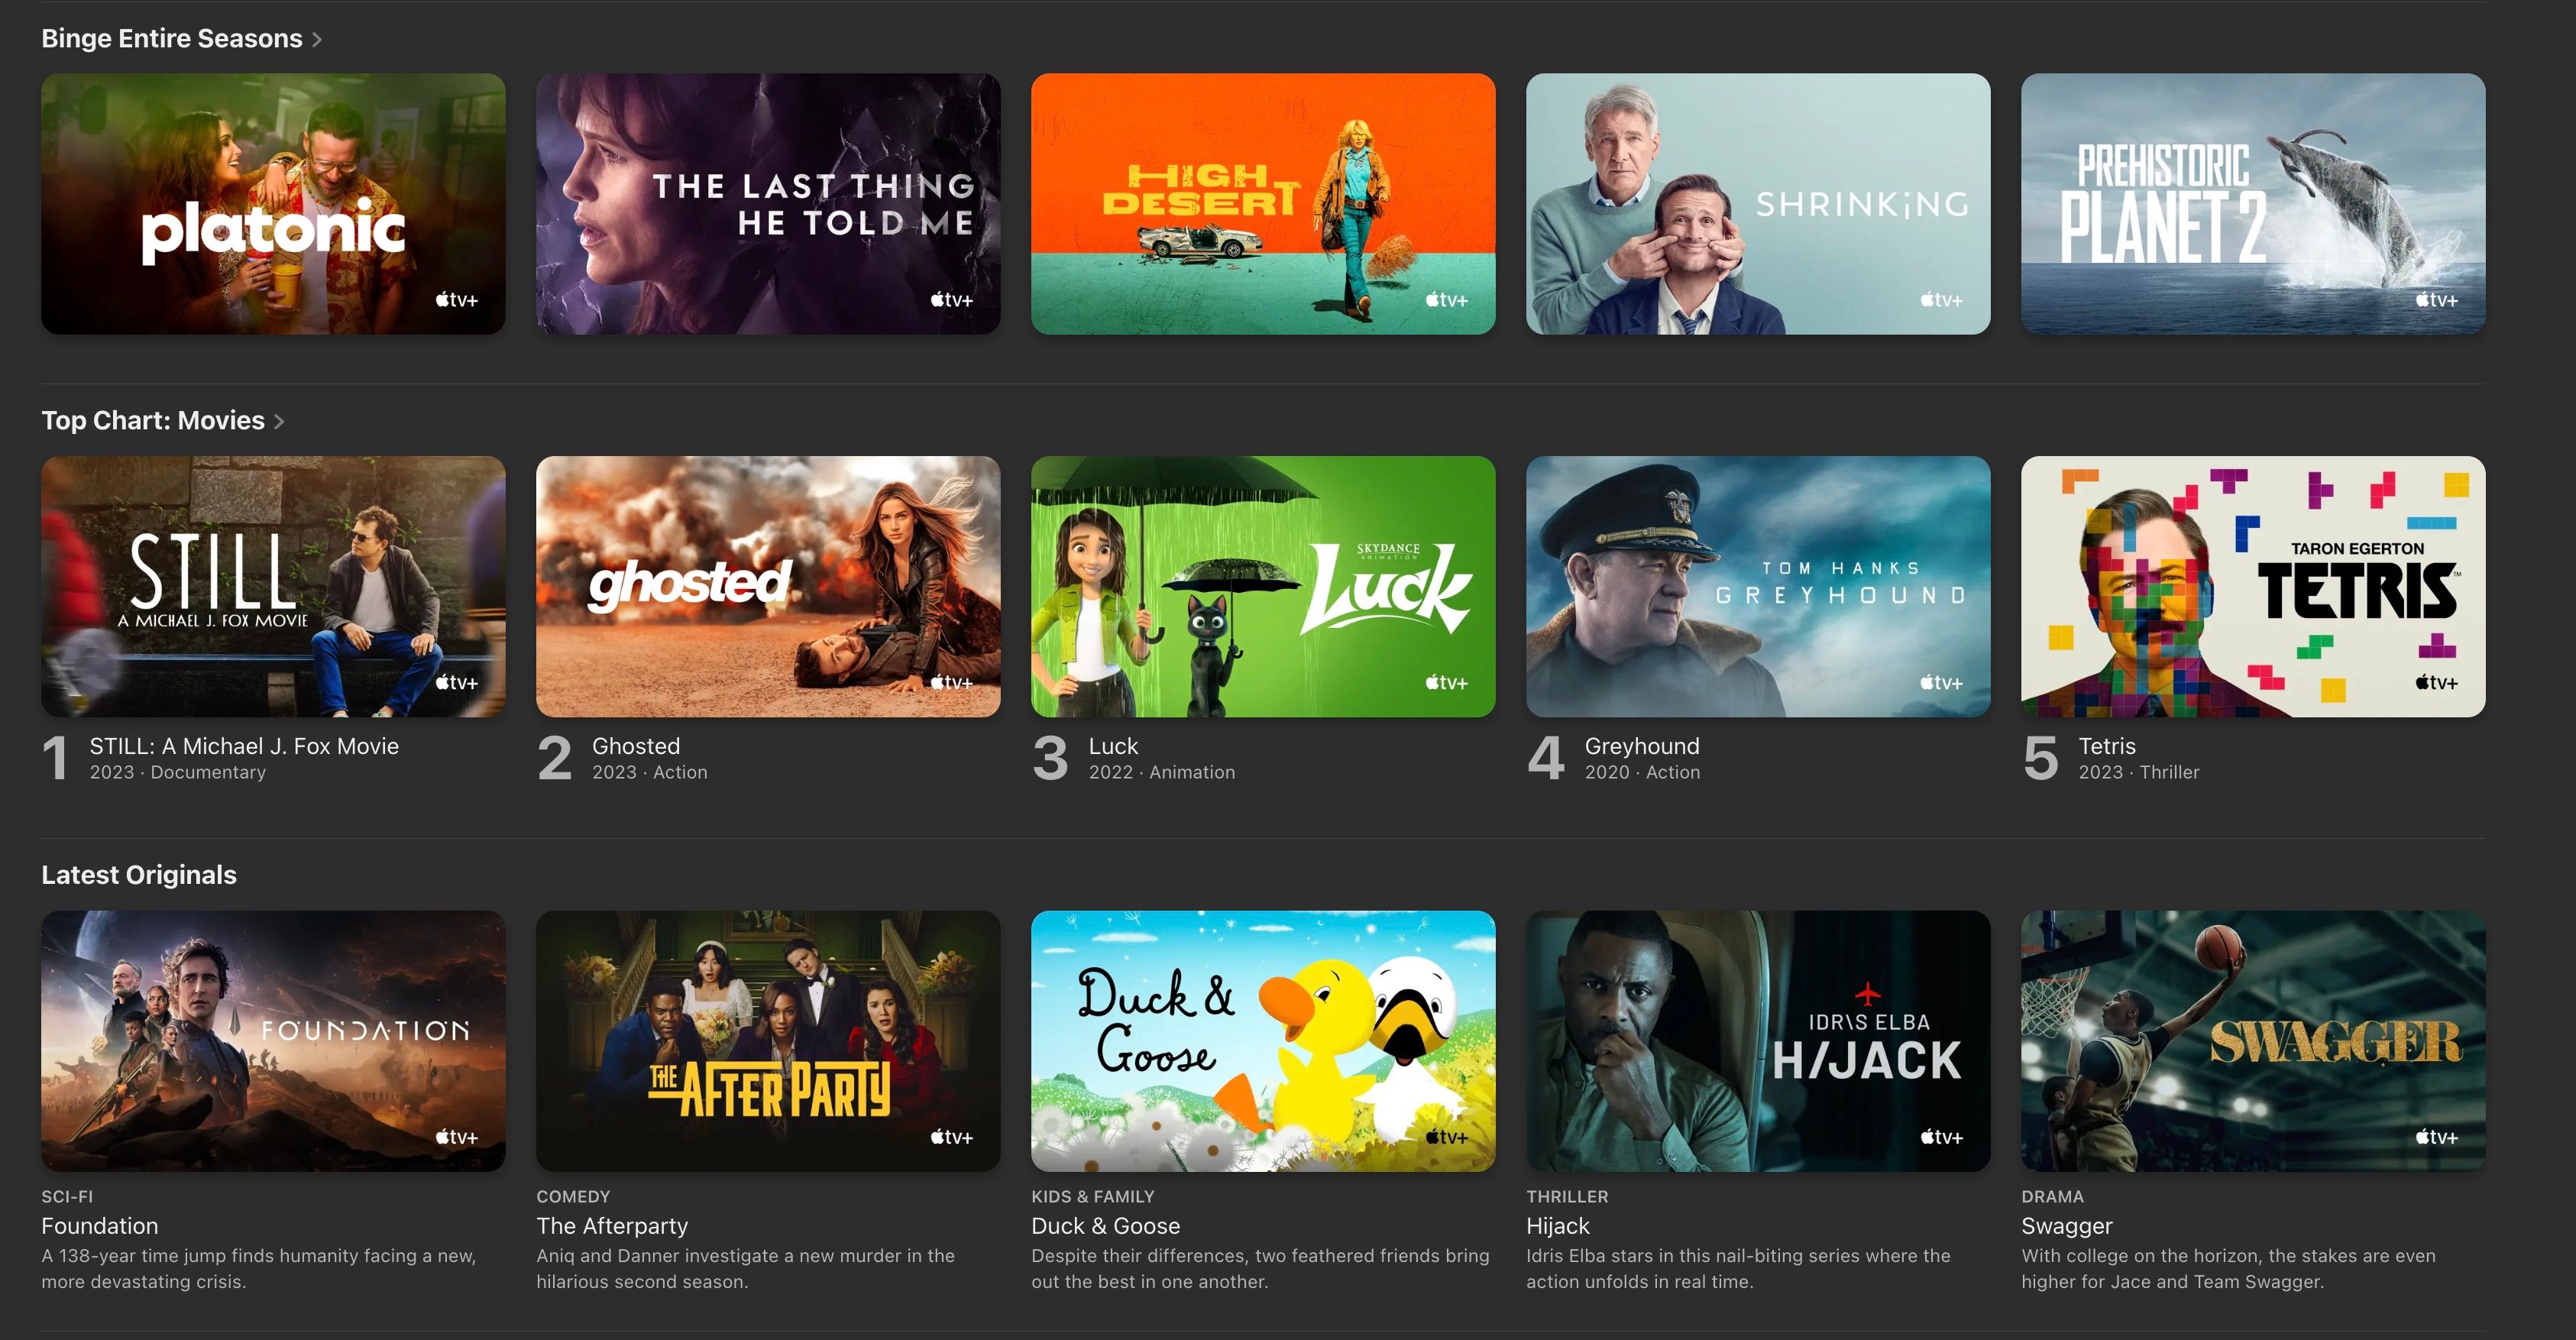 Apple TV+ Titles with binge entire season section